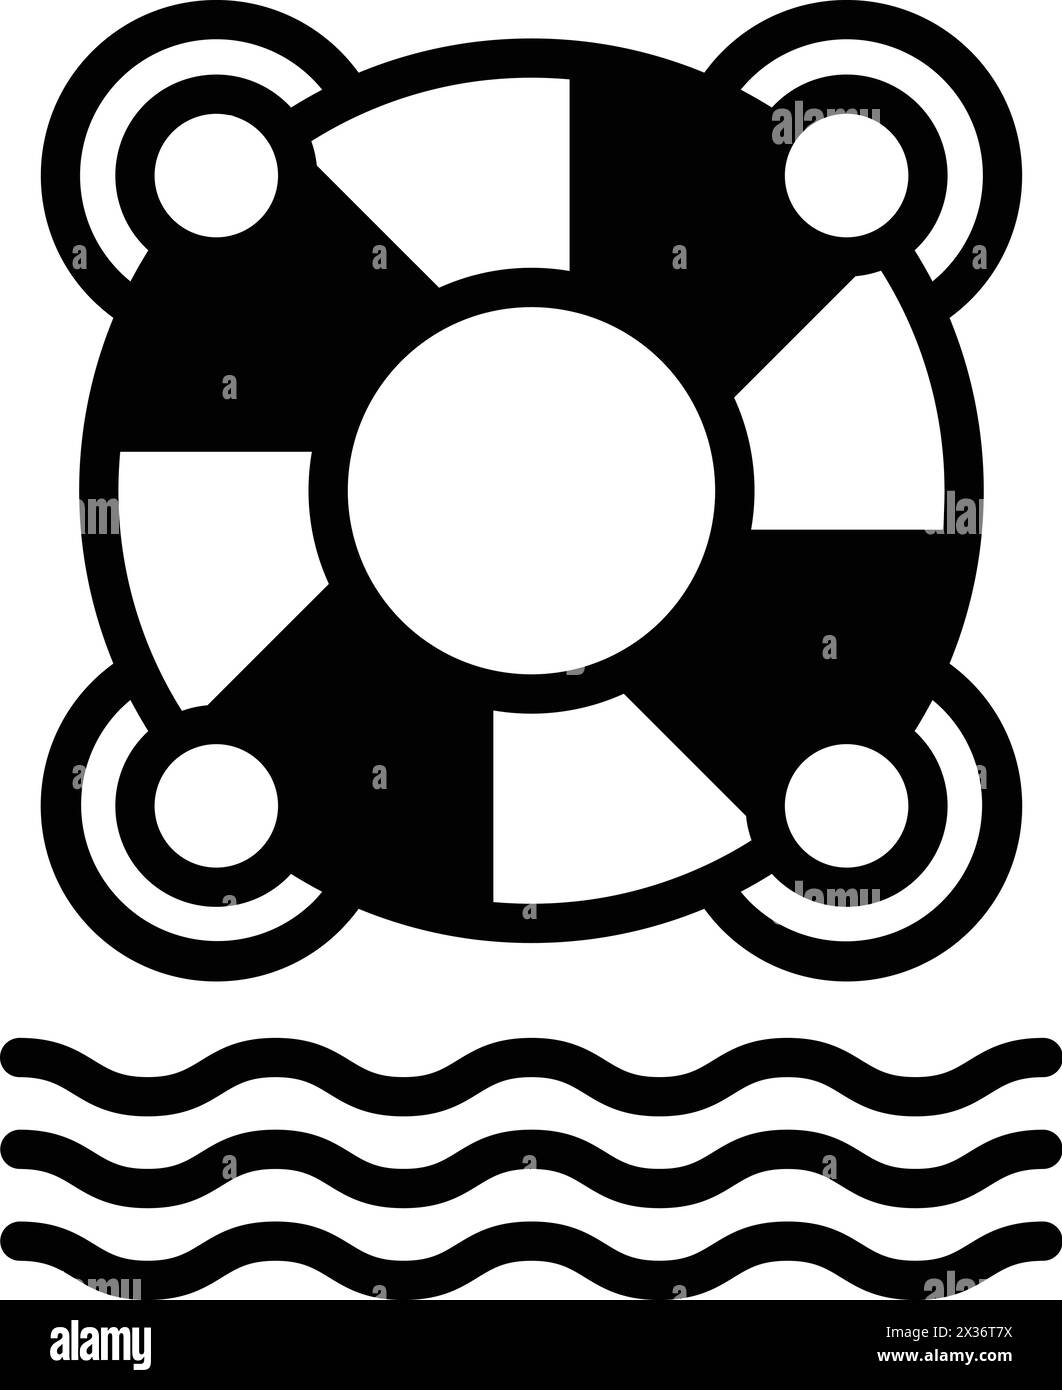 A black and white image of a life preserver with a wave in the background. The life preserver is the main focus of the image, and the wave adds a sens Stock Vector